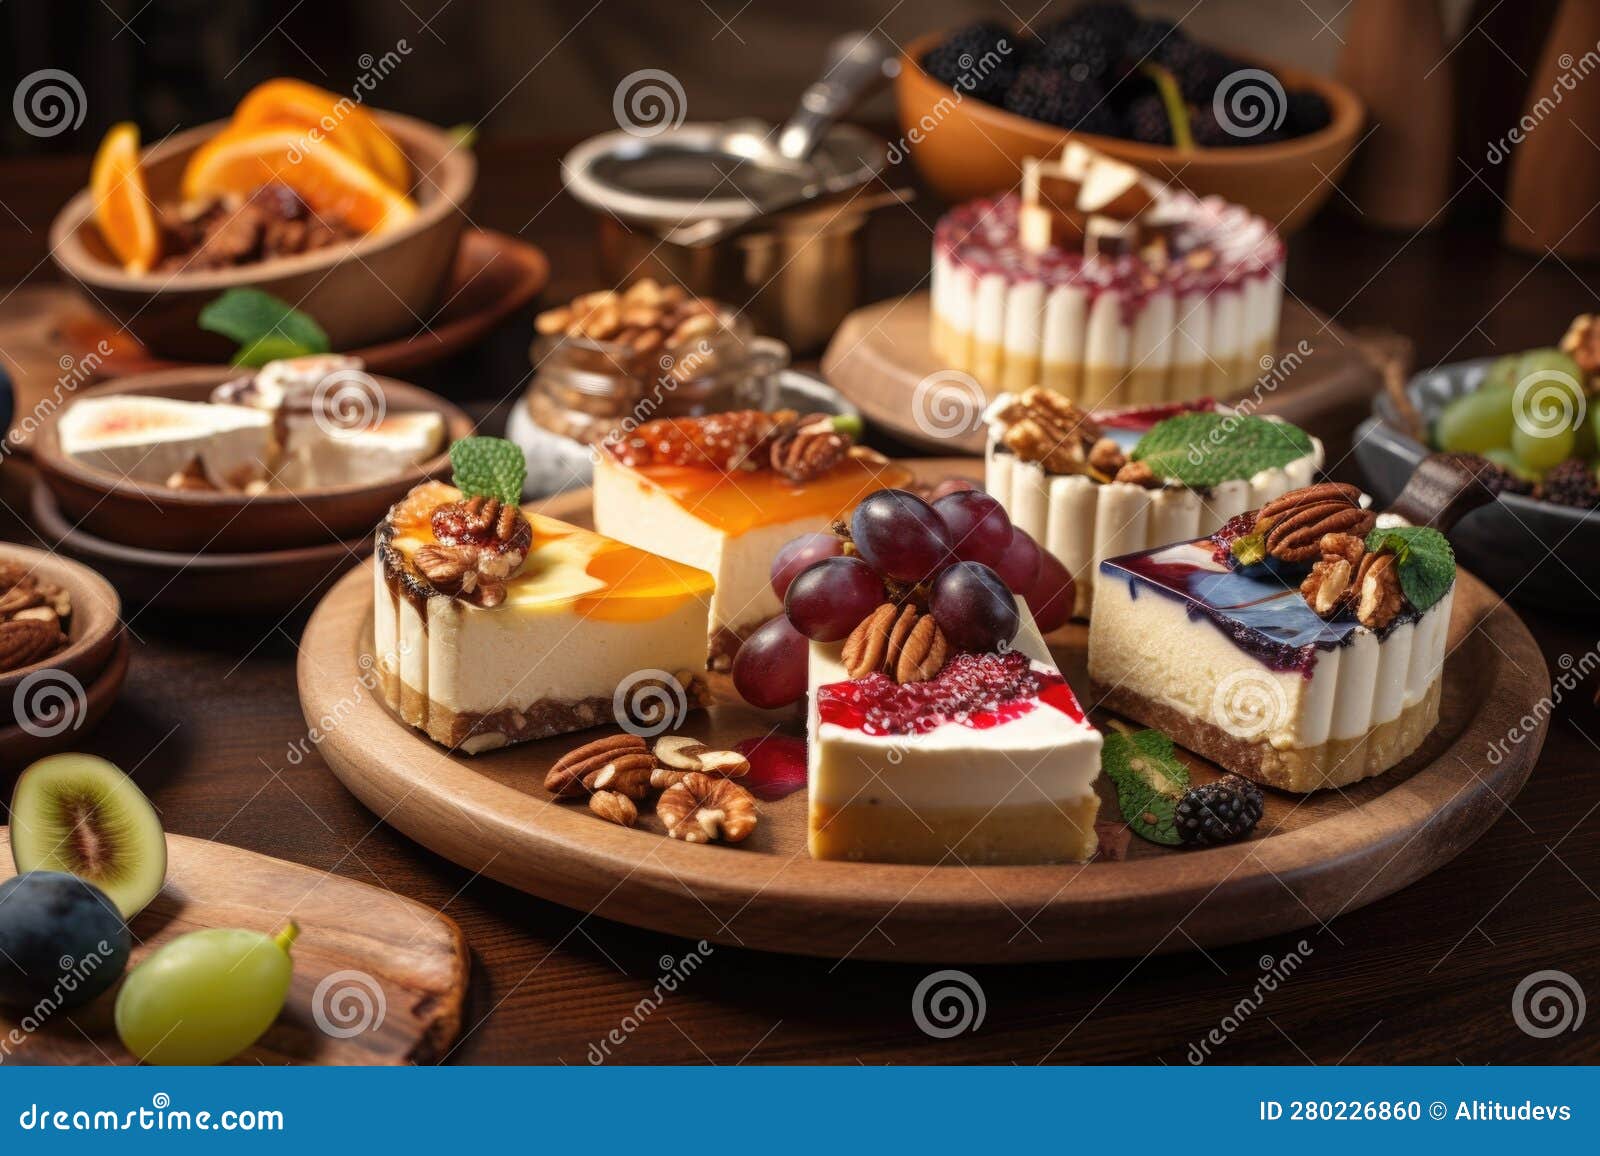 Platter of Cheesecake Slices, Served with Variety of Fruit and Nut ...